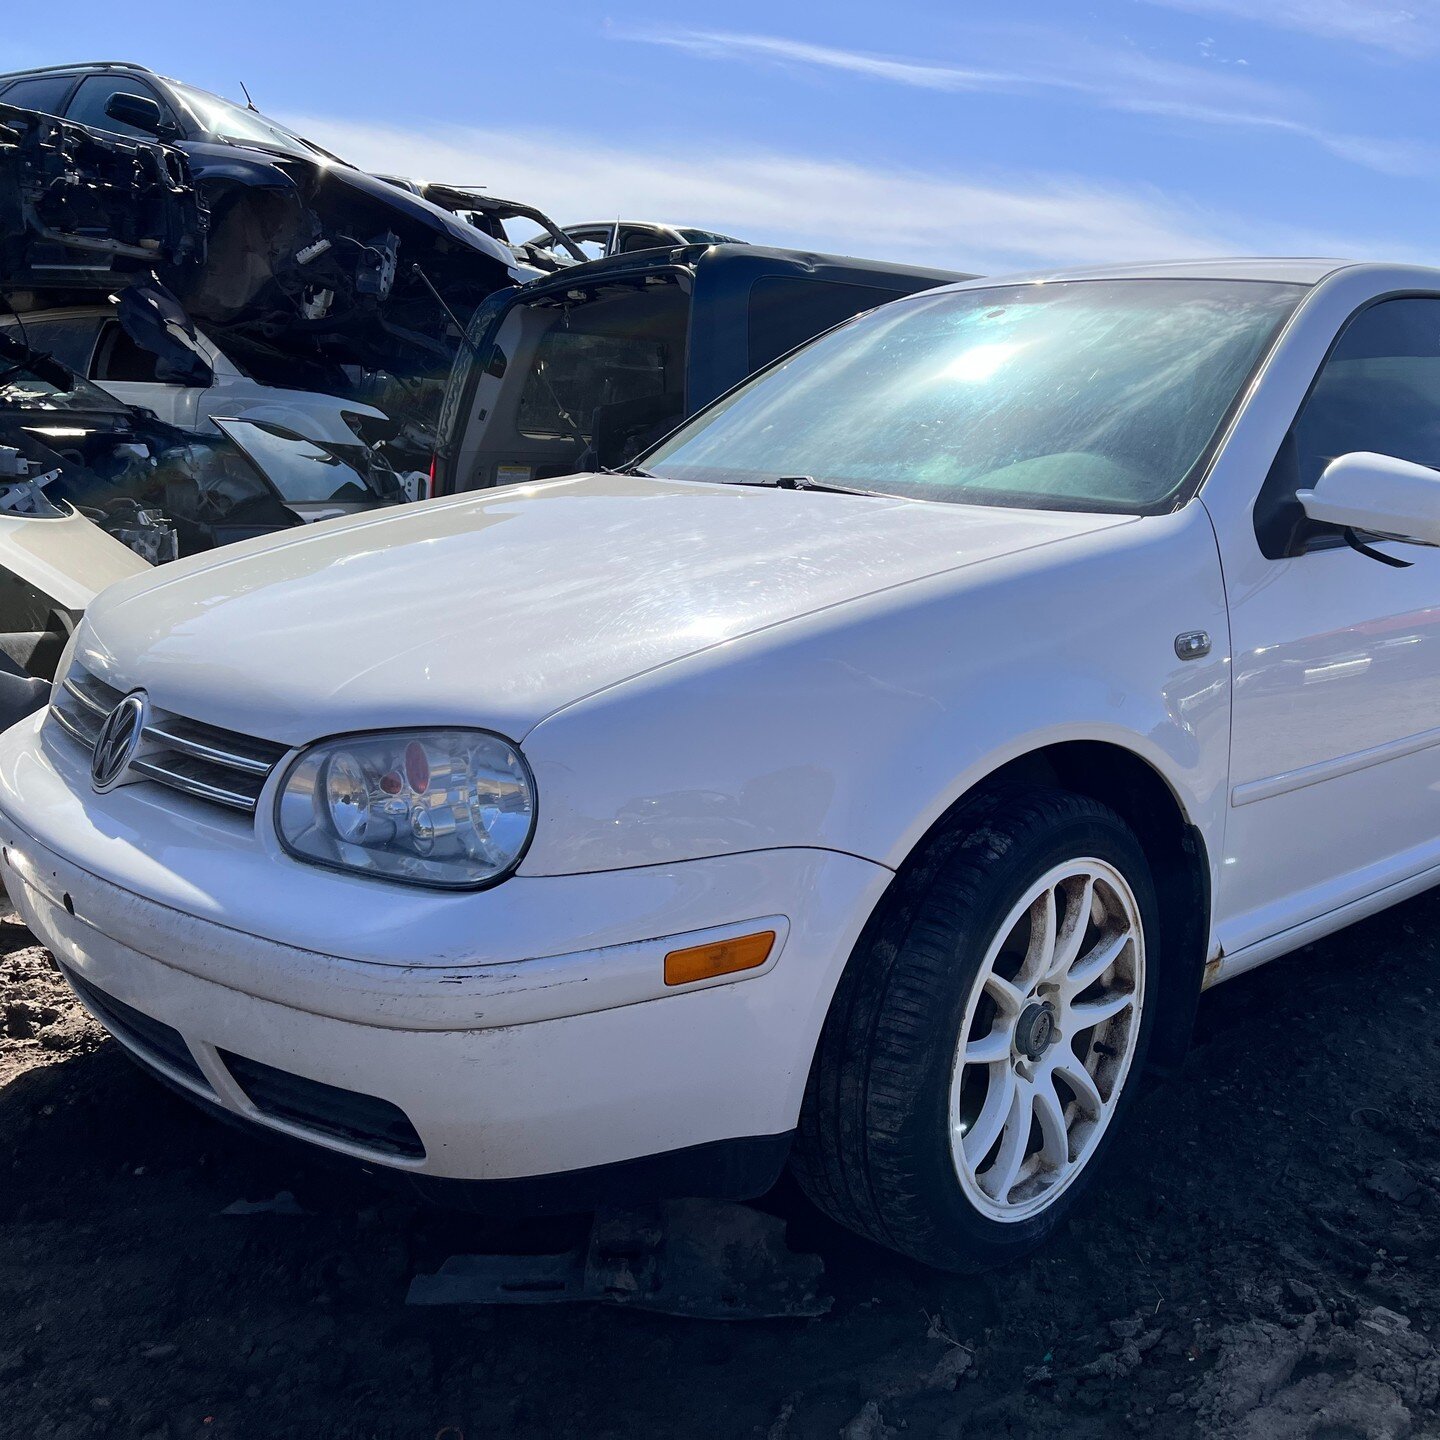 2002 VOLKSWAGON GOLF GLS 2L *FOR PARTS* - FWD, AUTOMATIC 4 SPEED TRANSMISSION, 4 CYLINDER , WHITE(LB9A), KMS:189891, VIN:9BWGK61J824012028

We offer contactless delivery and are more than willing to accommodate your needs.
Why pick your part when we 